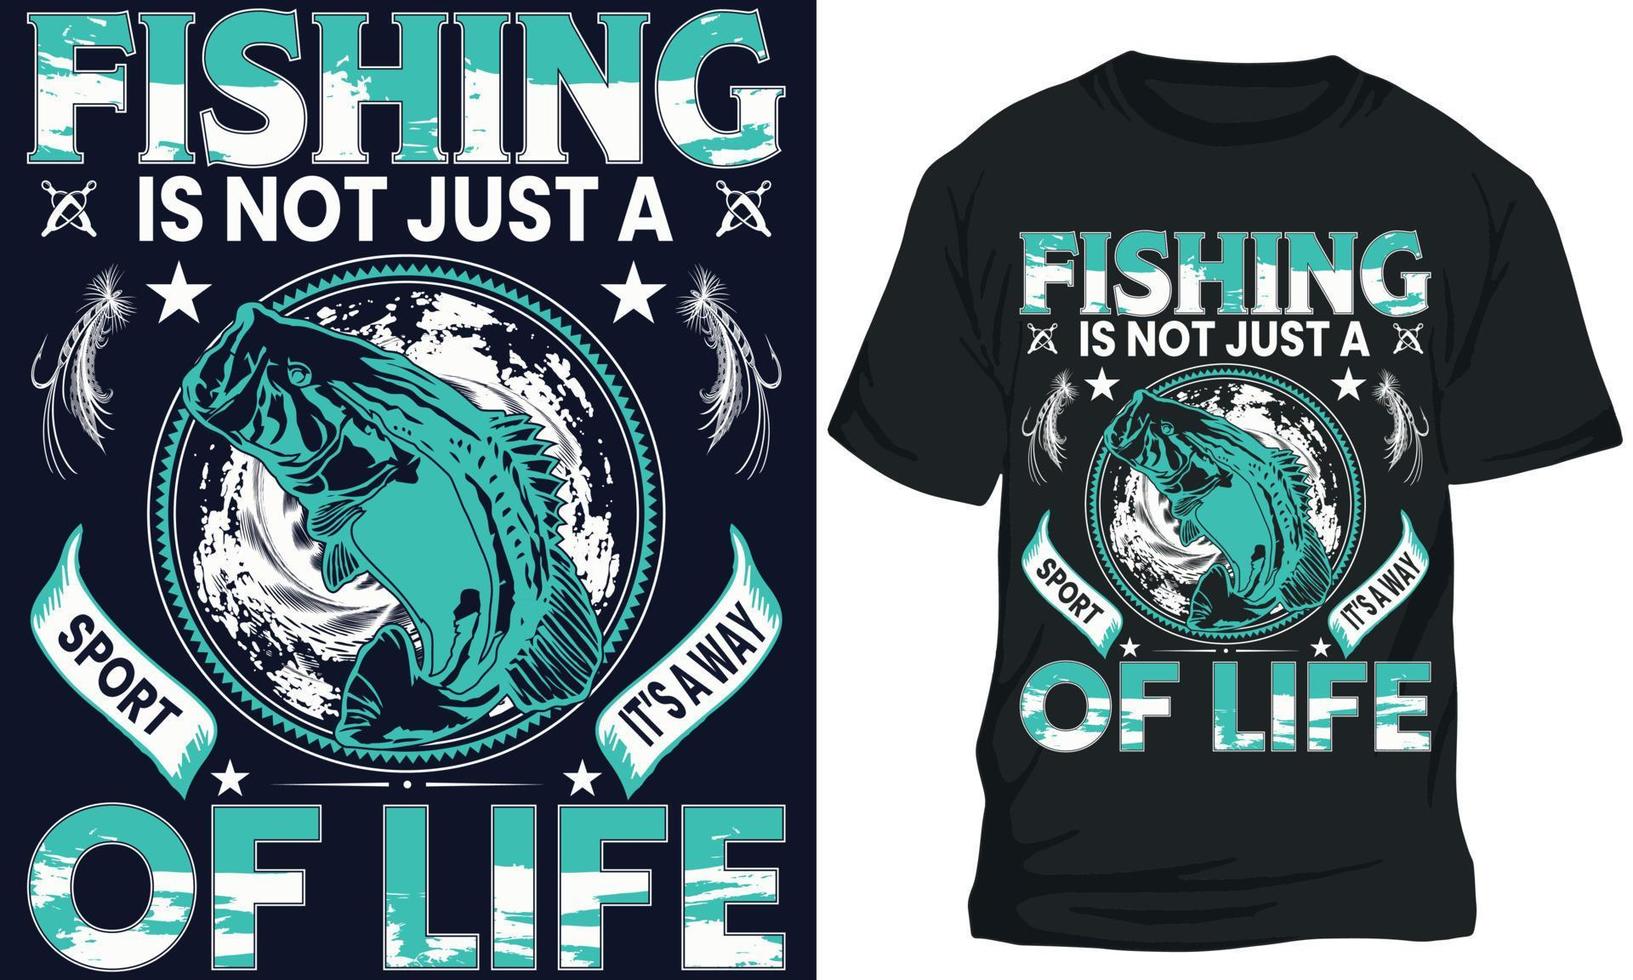 FISHING IS NOT JUST A SPORT IT S A WAY OF LIFE. fishing t-shirt design vector